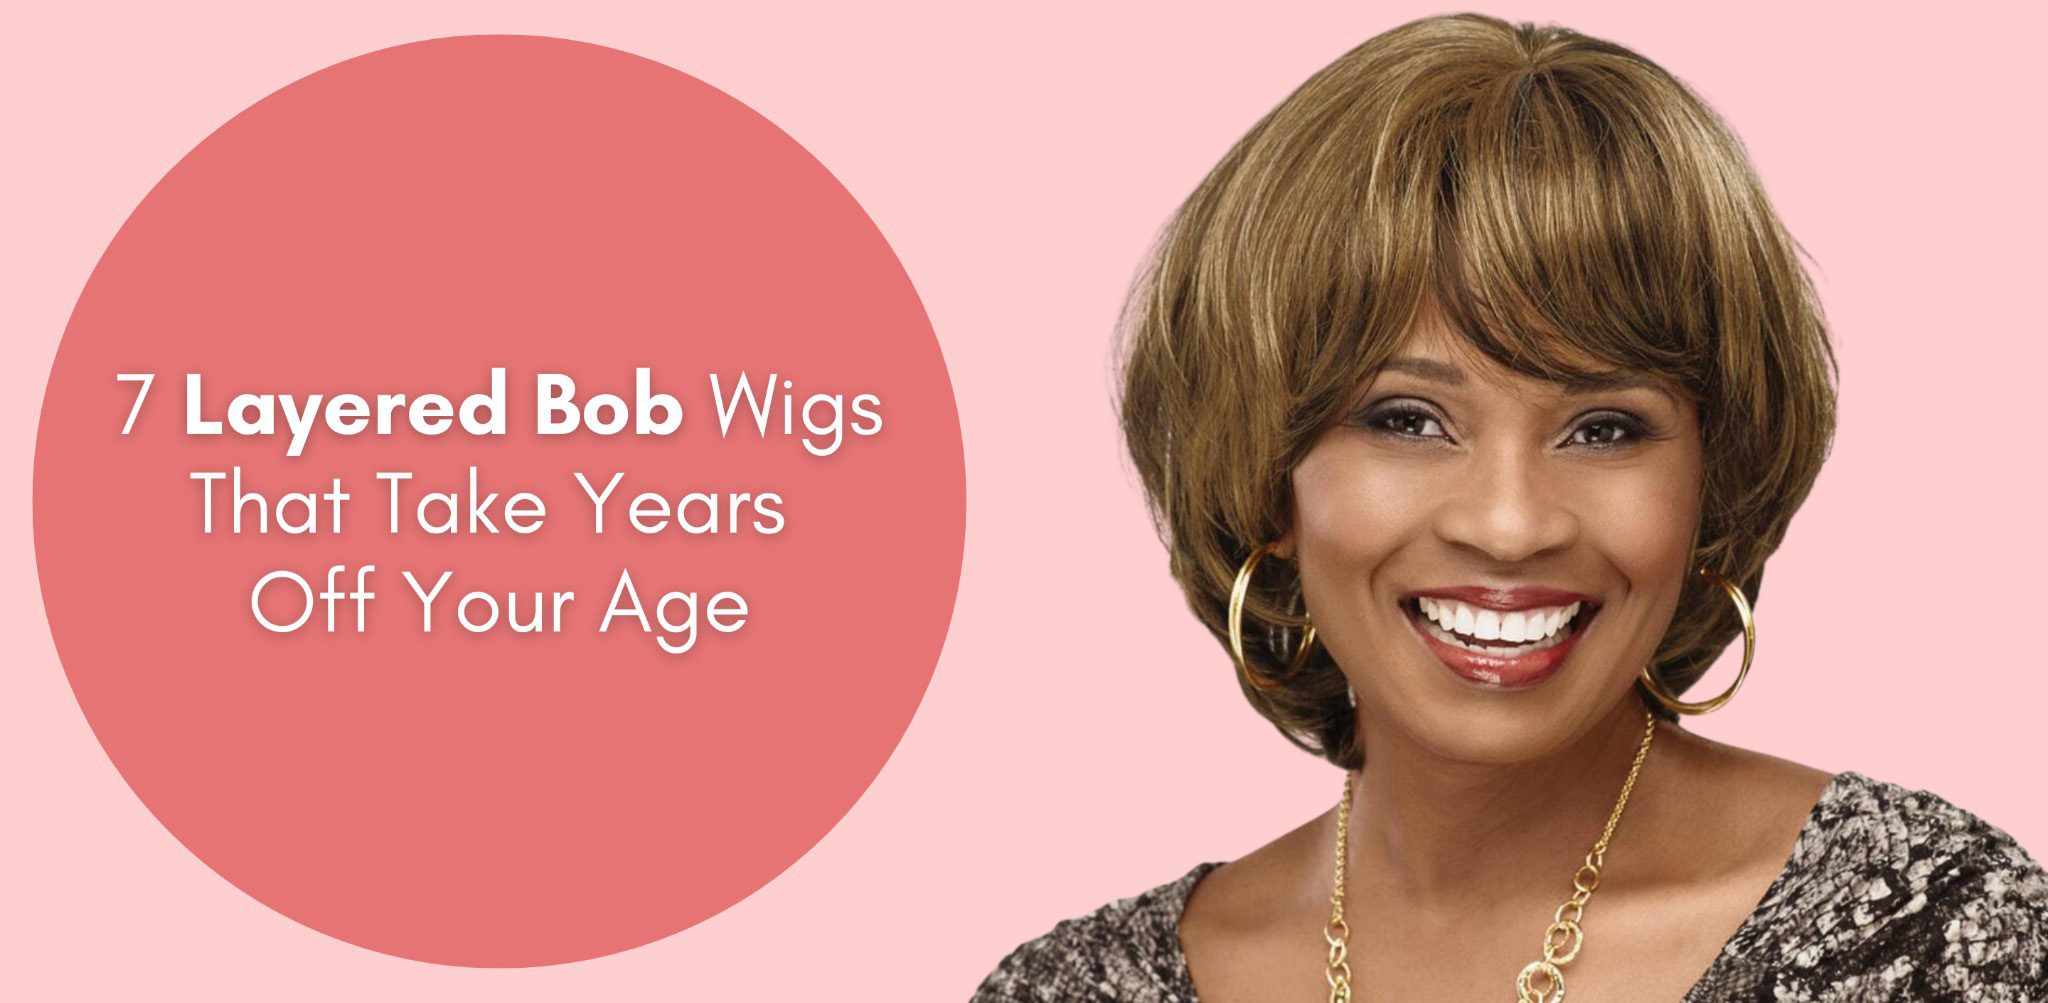 7 layered bob wigs that take years off your age